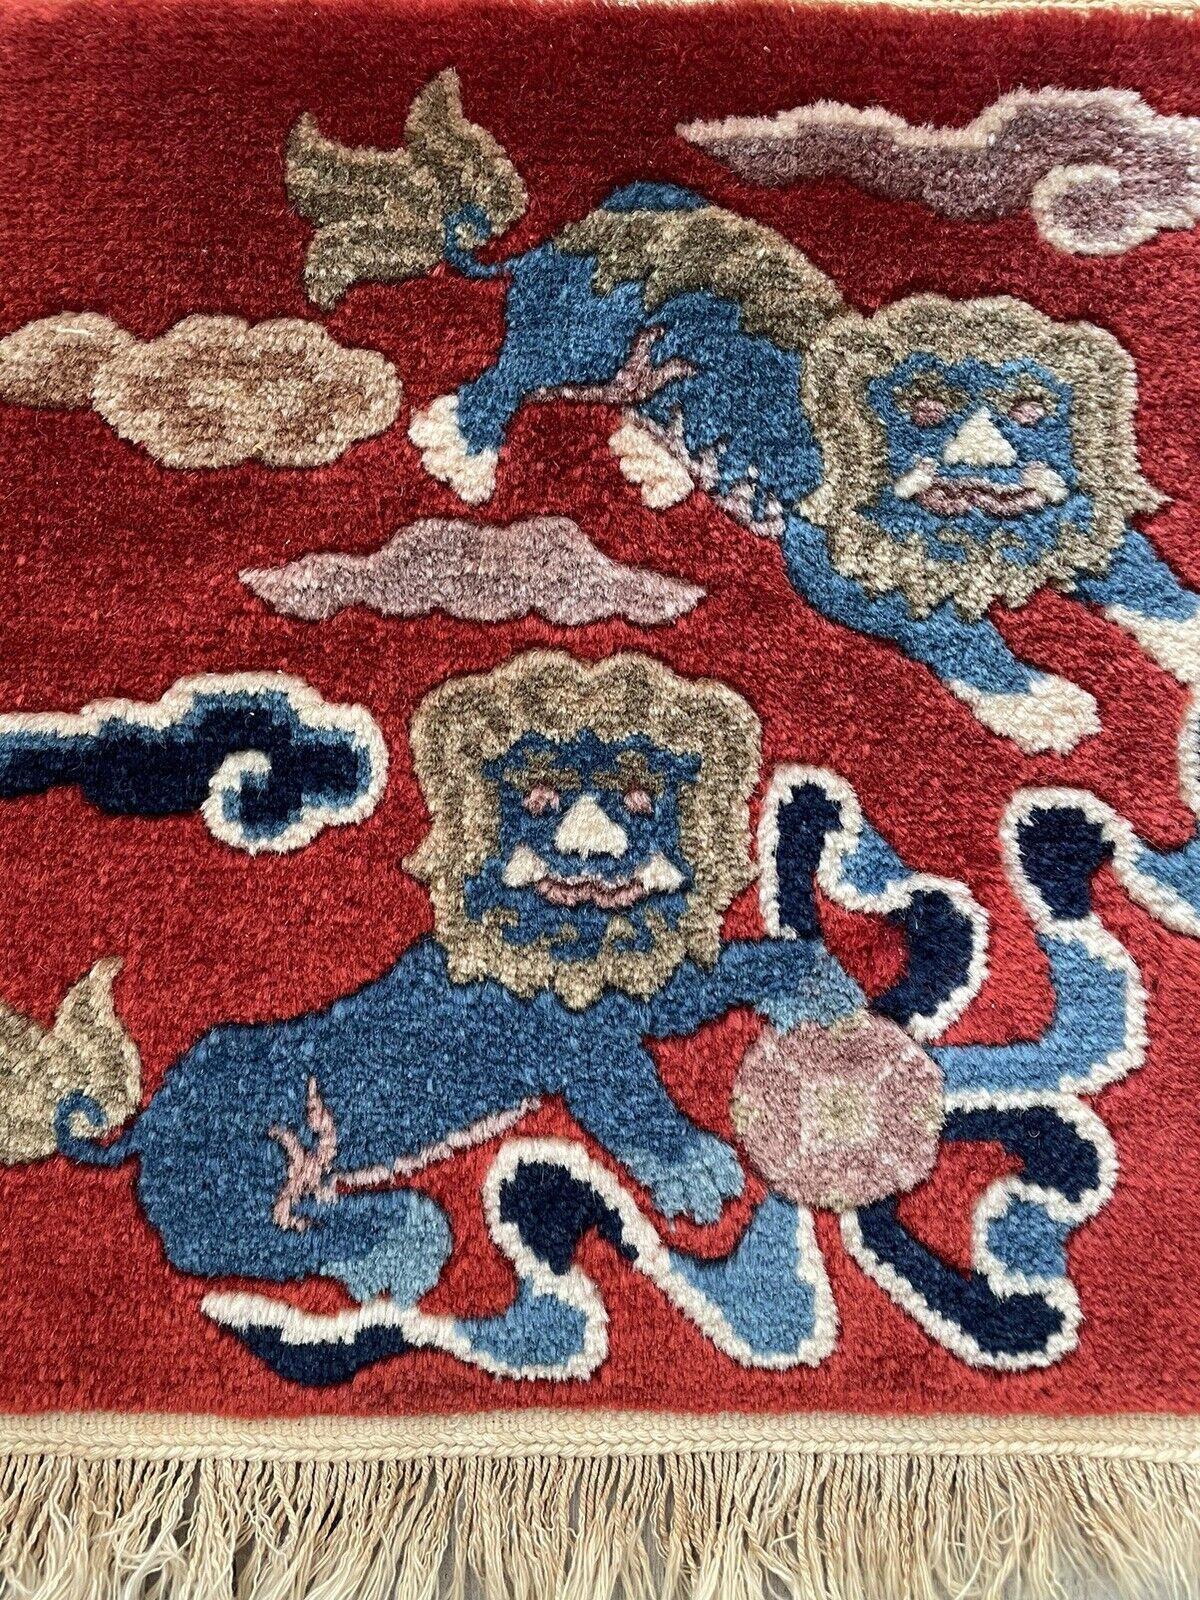 Close-up of captivating lions design on Handmade Antique Art Deco Chinese Mat - Detailed view showcasing the captivating lions motif woven into the rug's design.